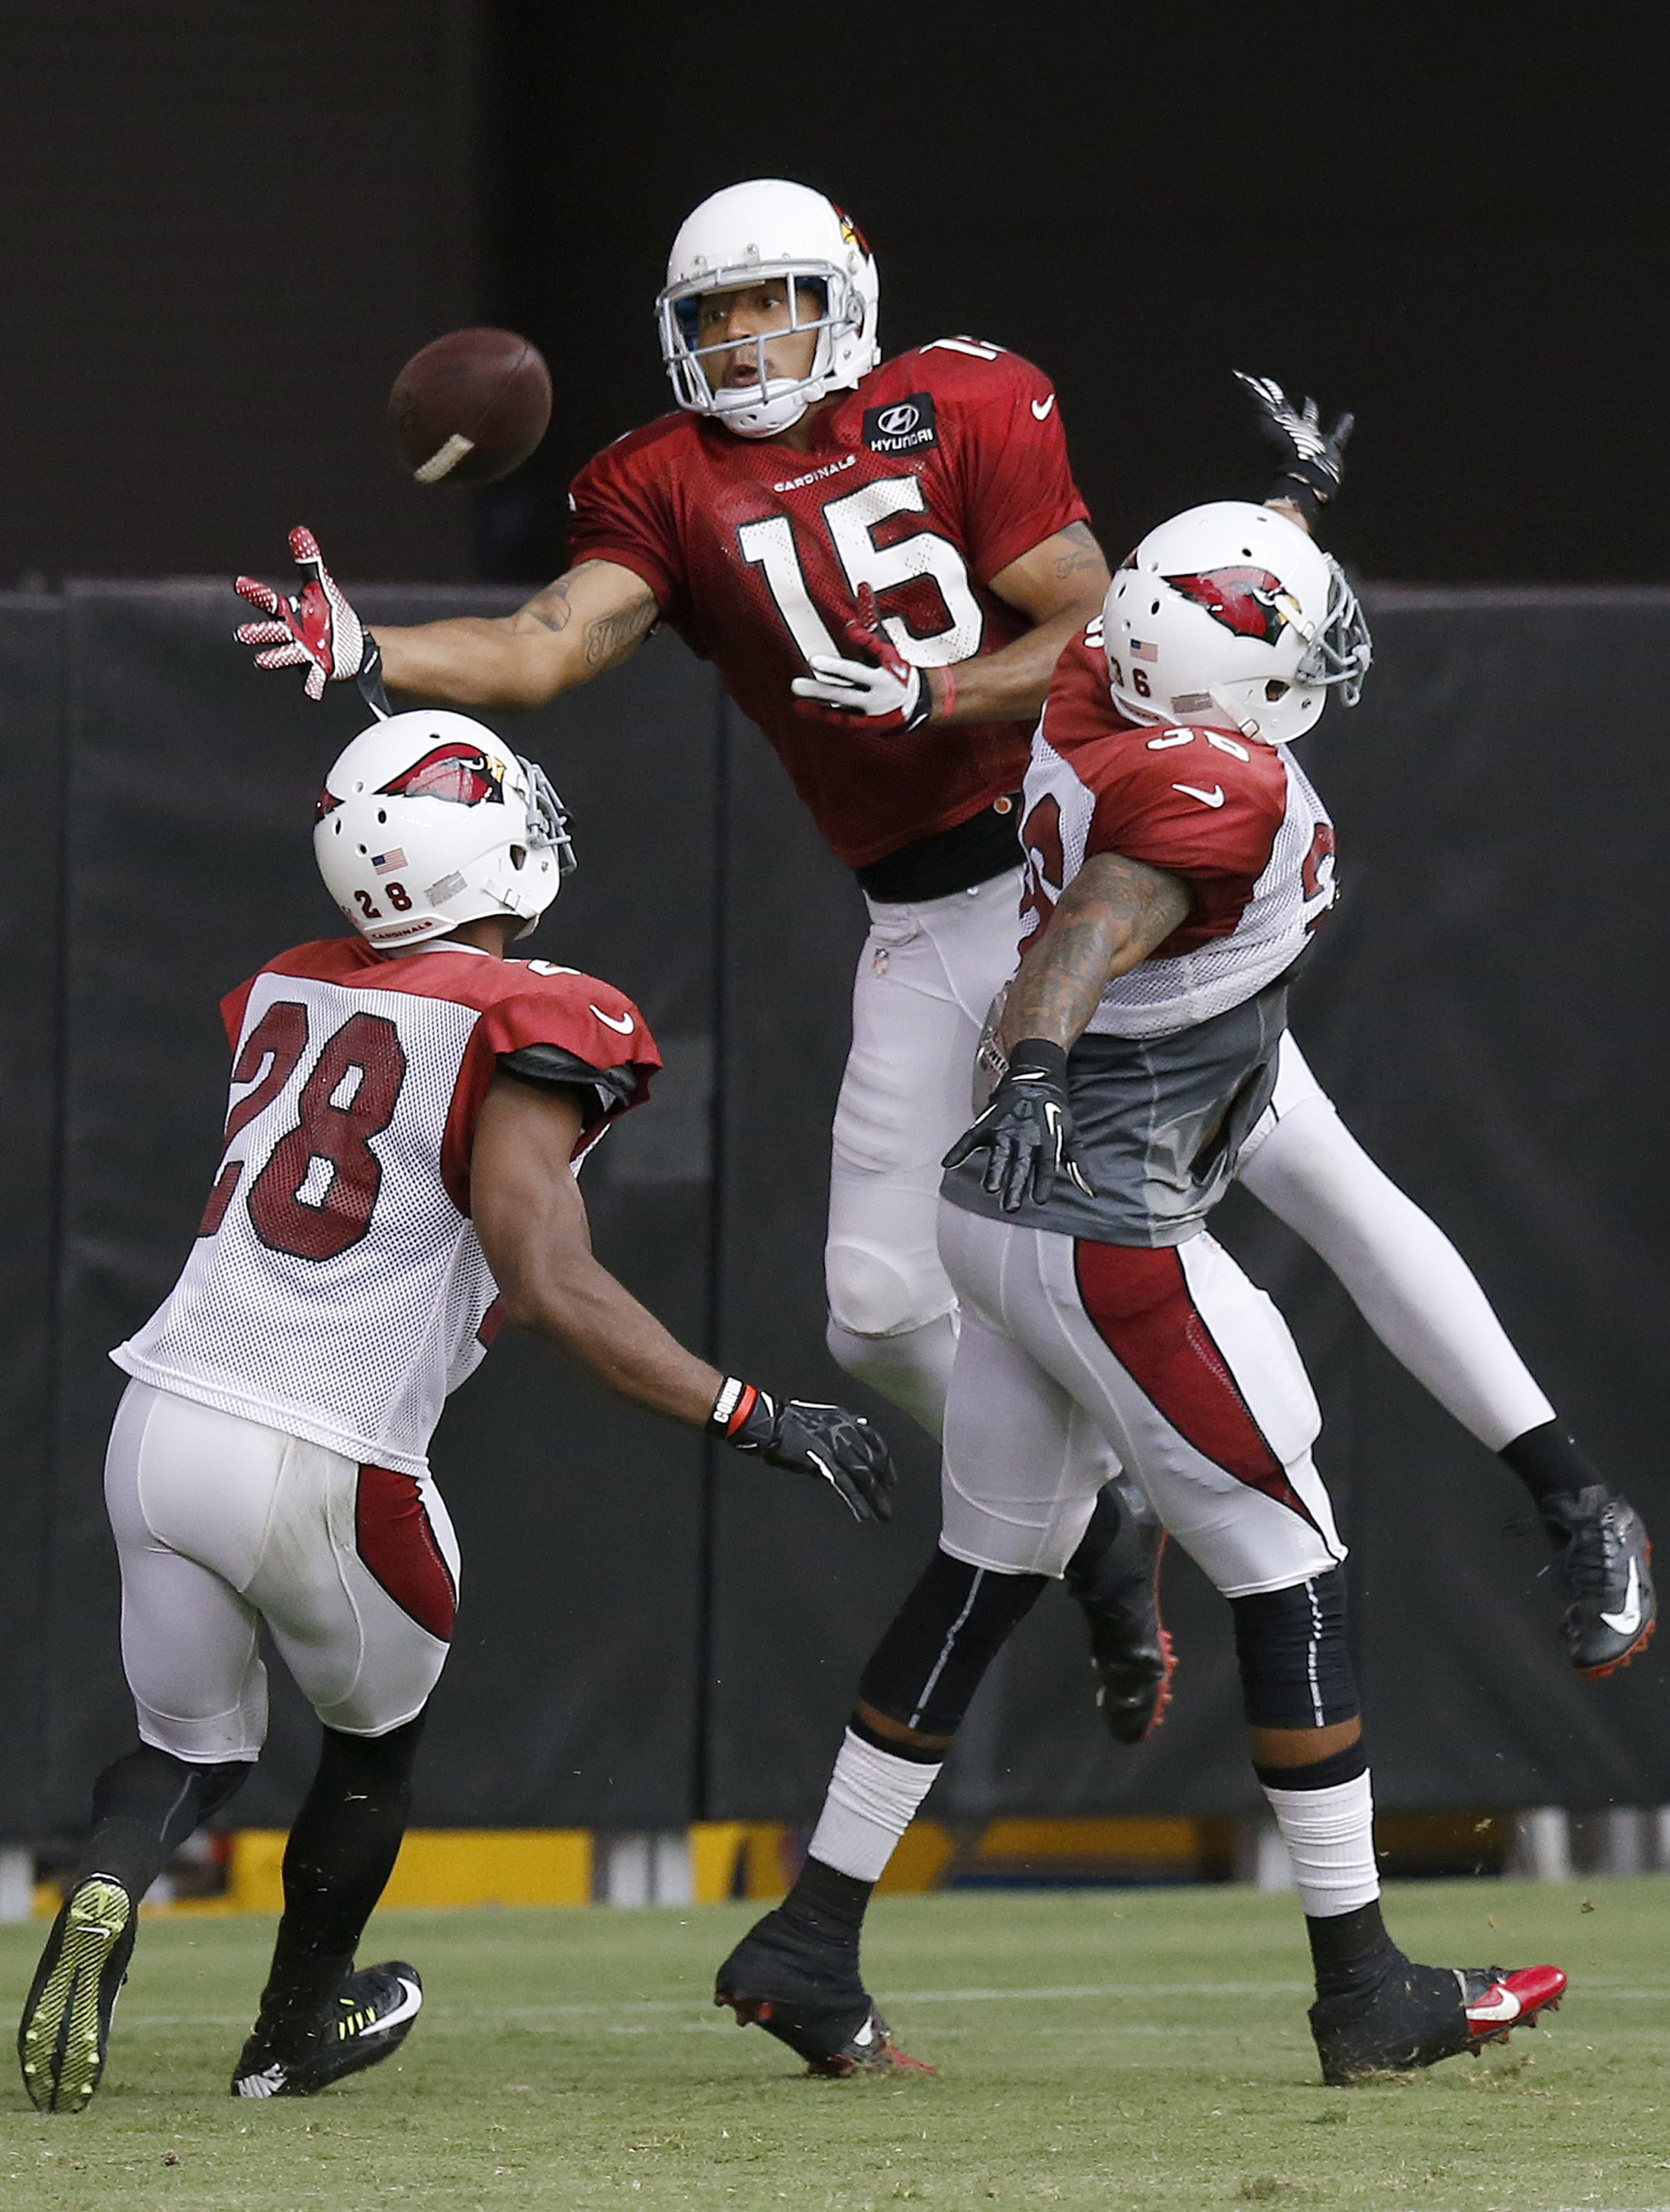 Arizona Cardinals' Justin Bethel (28) and Deone Buccanon (36) break up a pass intended for Michael Floyd (15) during NFL football training camp practice on Wednesday, July 30, 2014, in Glendale, Ariz. (AP Photo/Ross D. Franklin)